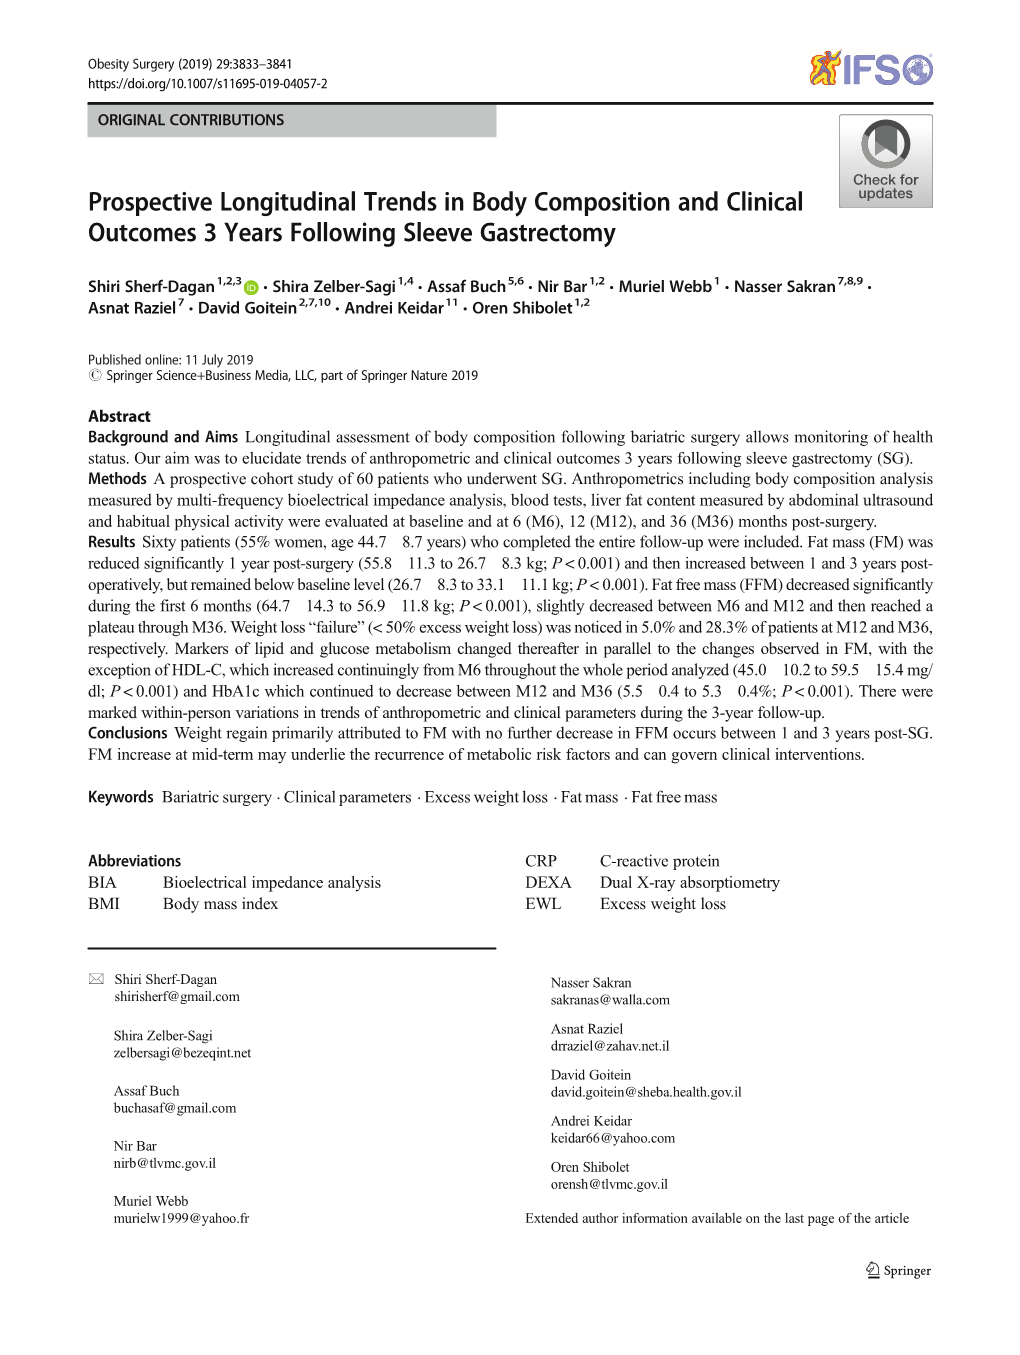 Prospective Longitudinal Trends in Body Composition and Clinical Outcomes 3 Years Following Sleeve Gastrectomy